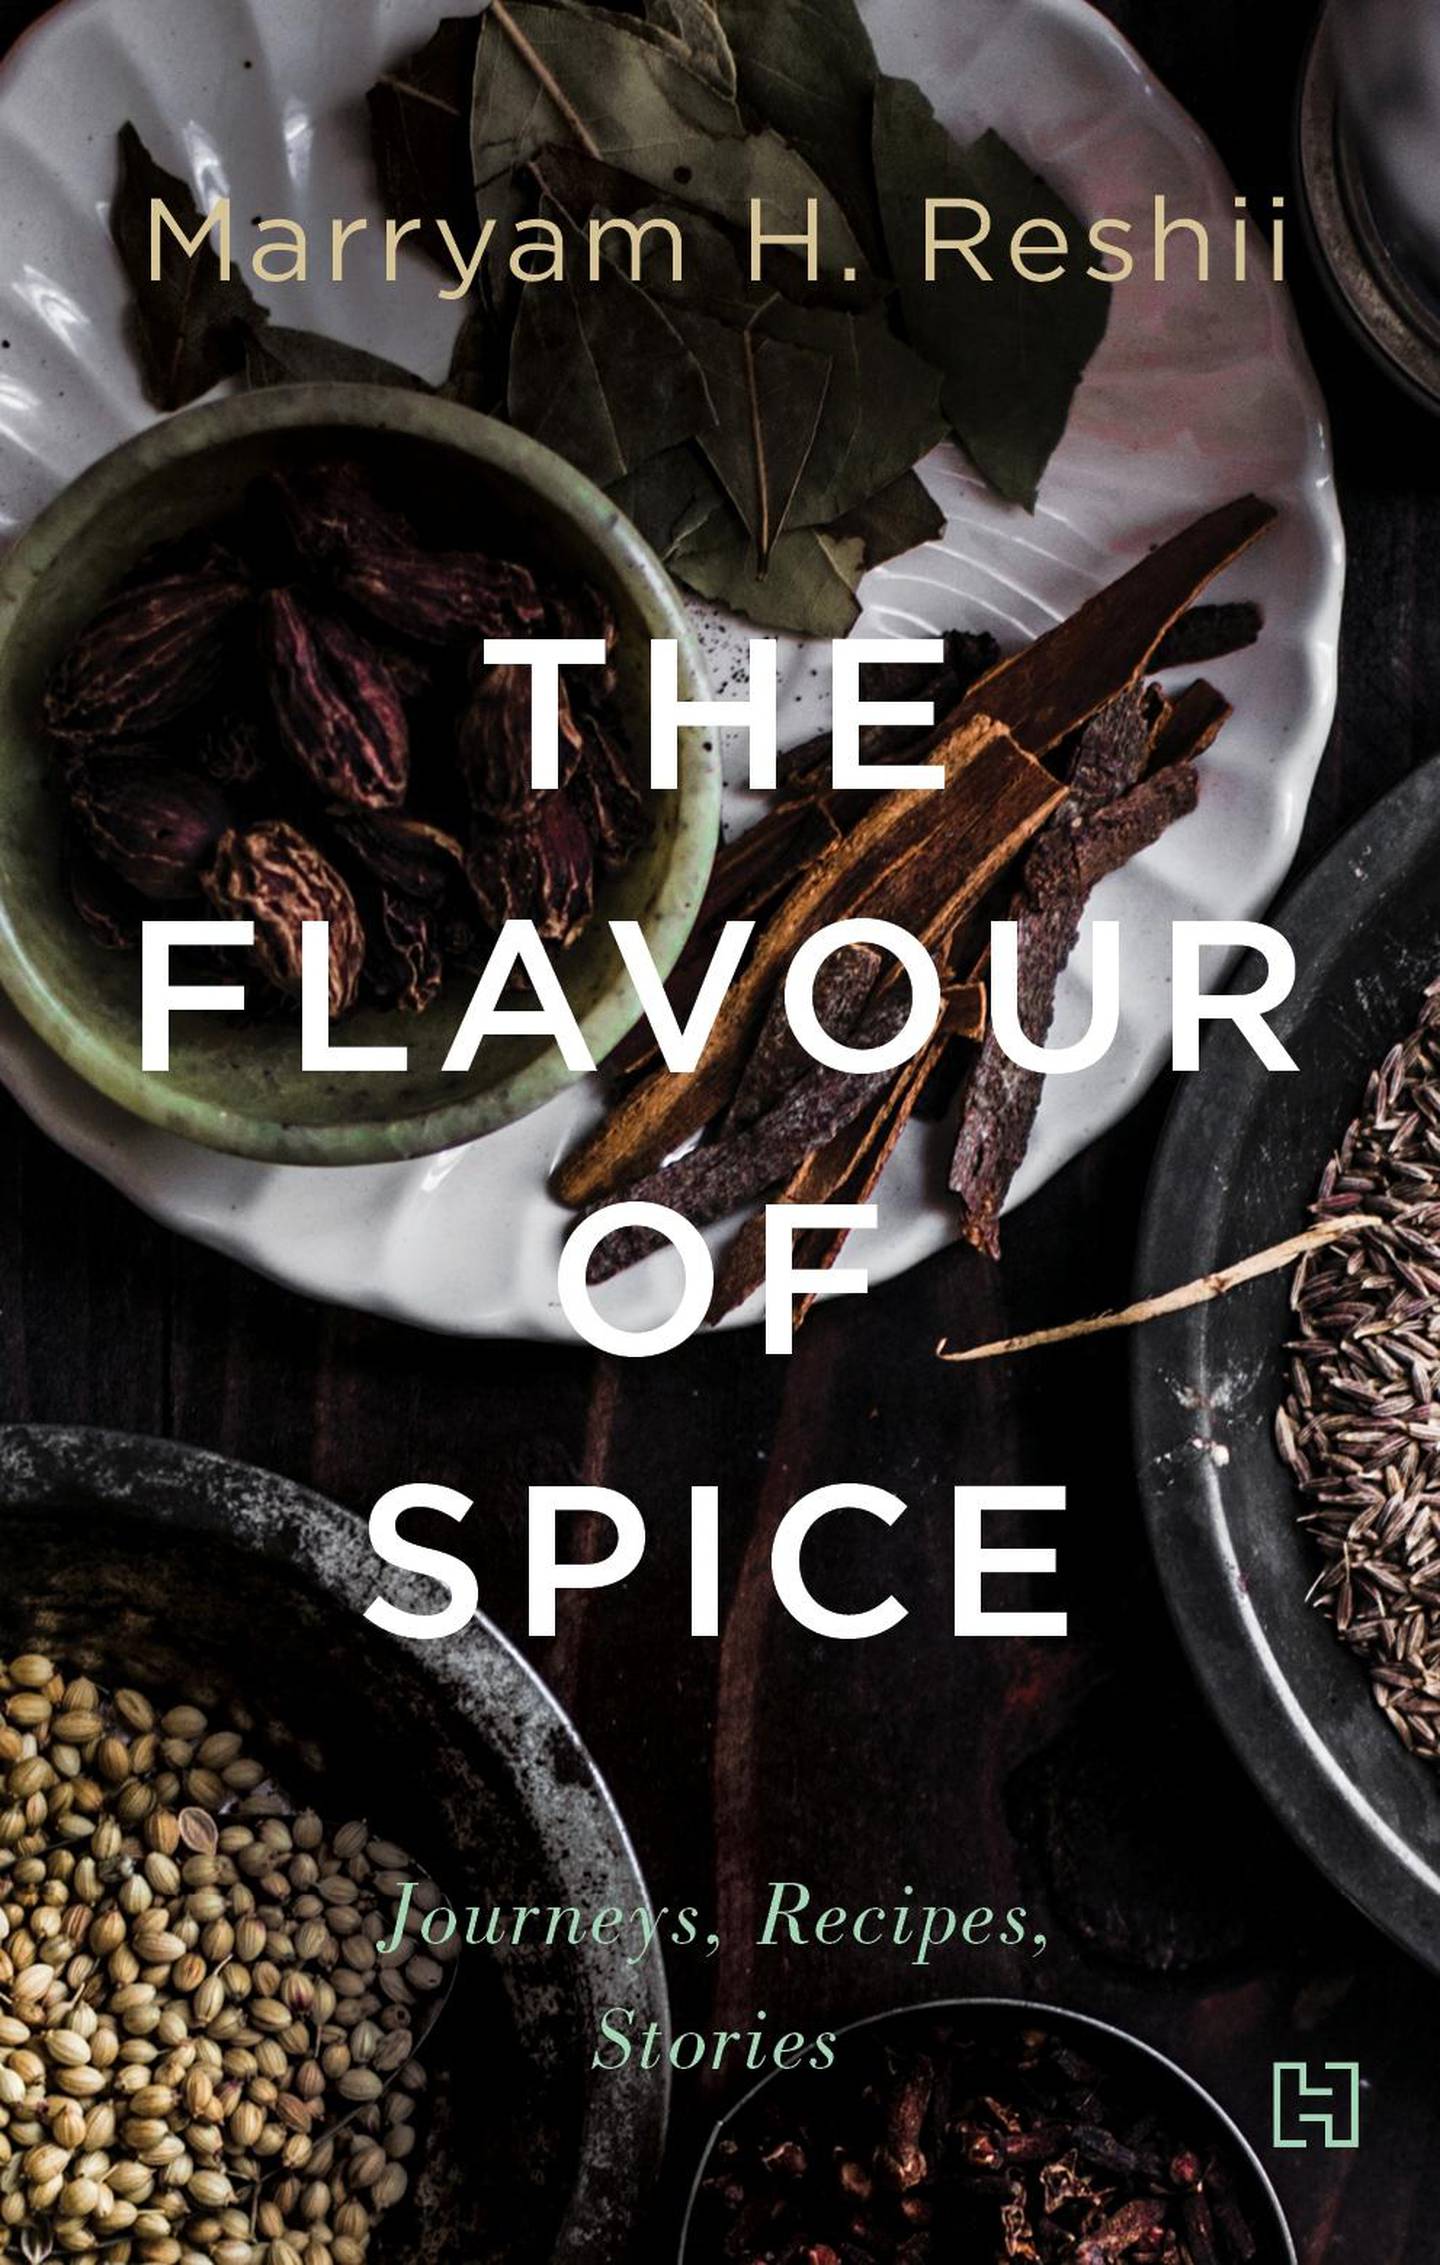 The Flavour of Spice is Marryam Reshii's new release. Hachette